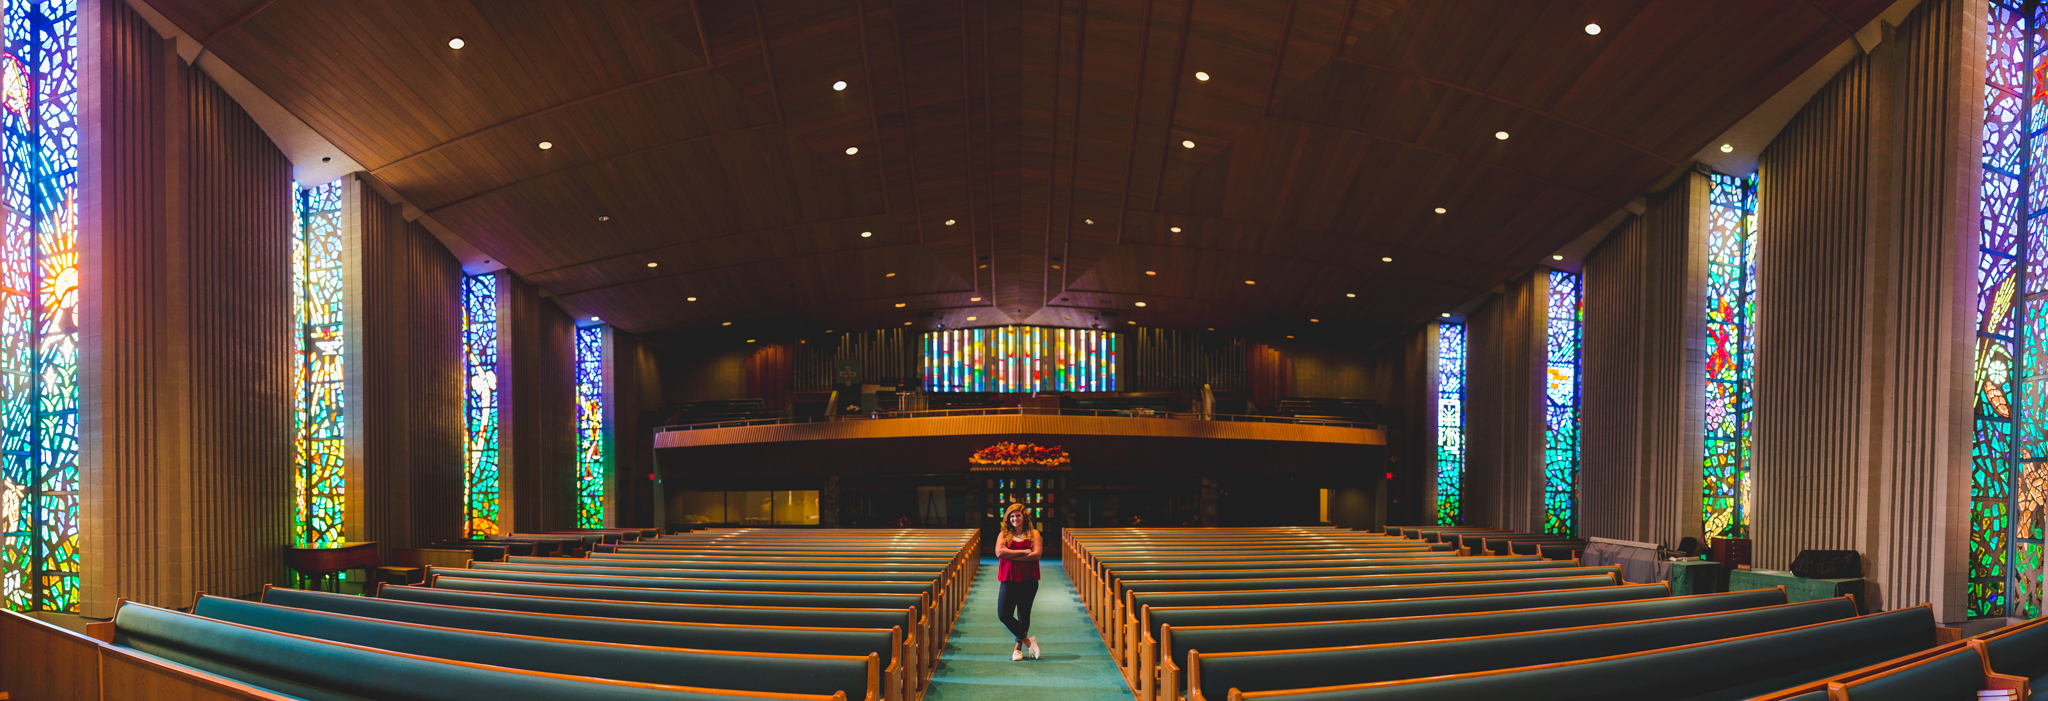 Awesome Church Panorama Stained Glass Shot Senior Photography